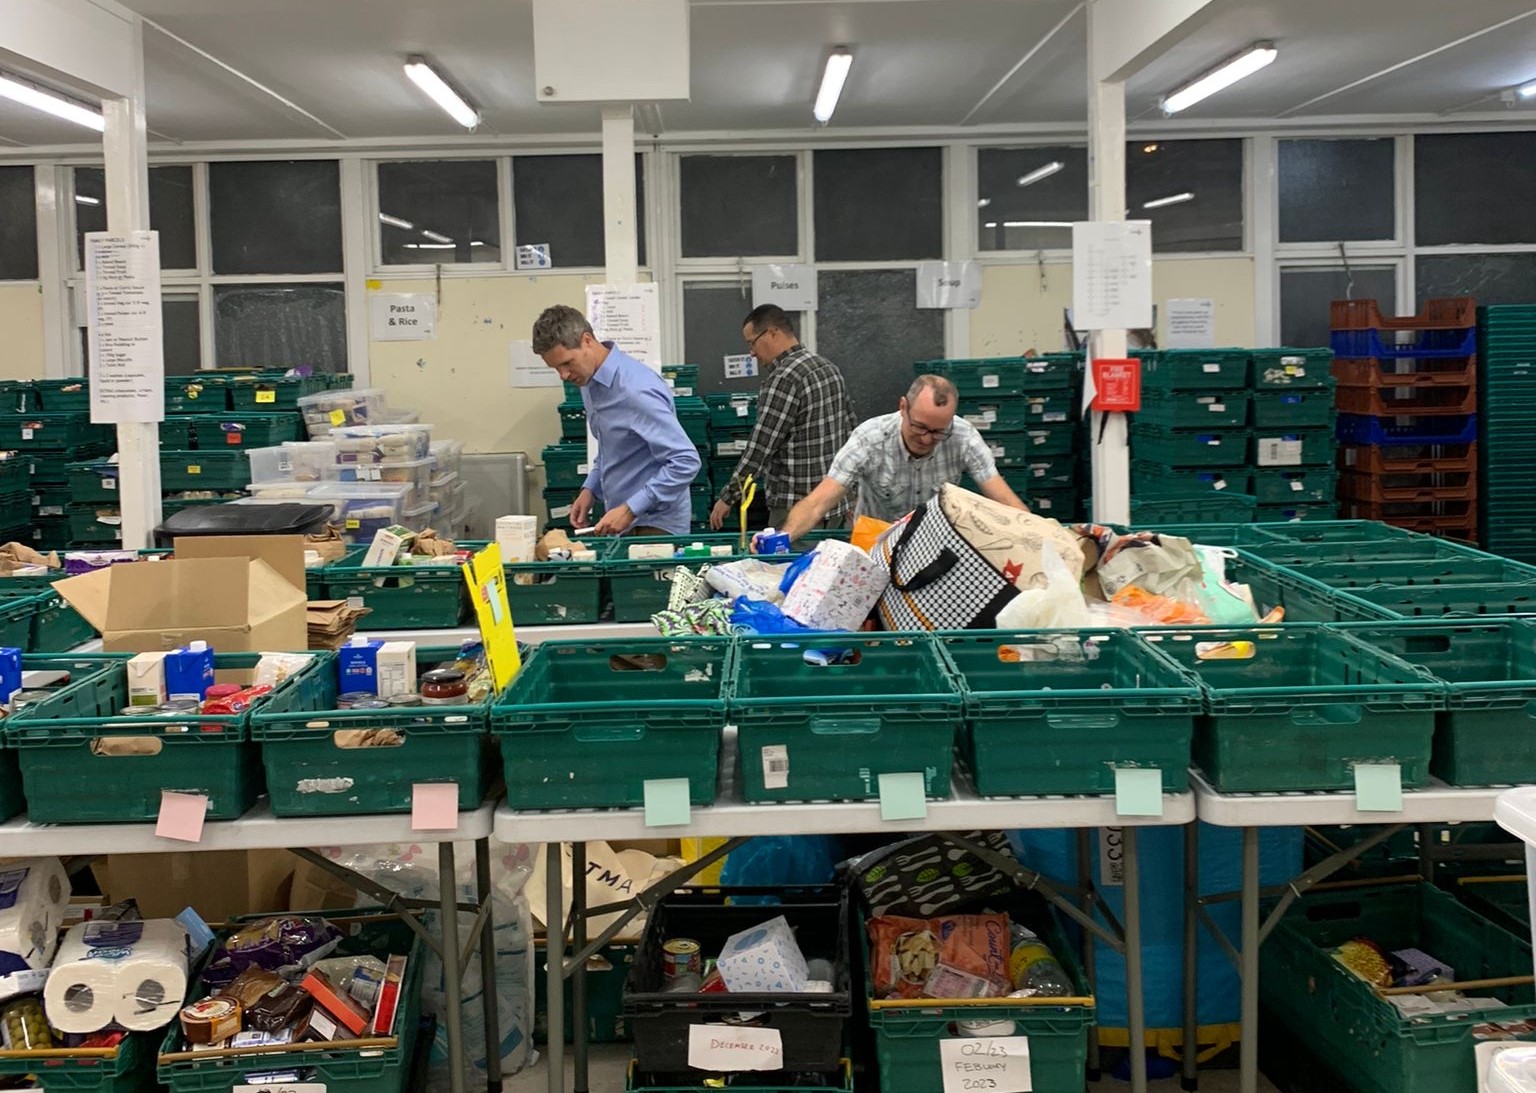 Supermarket sweep activity with the Trussell Trust